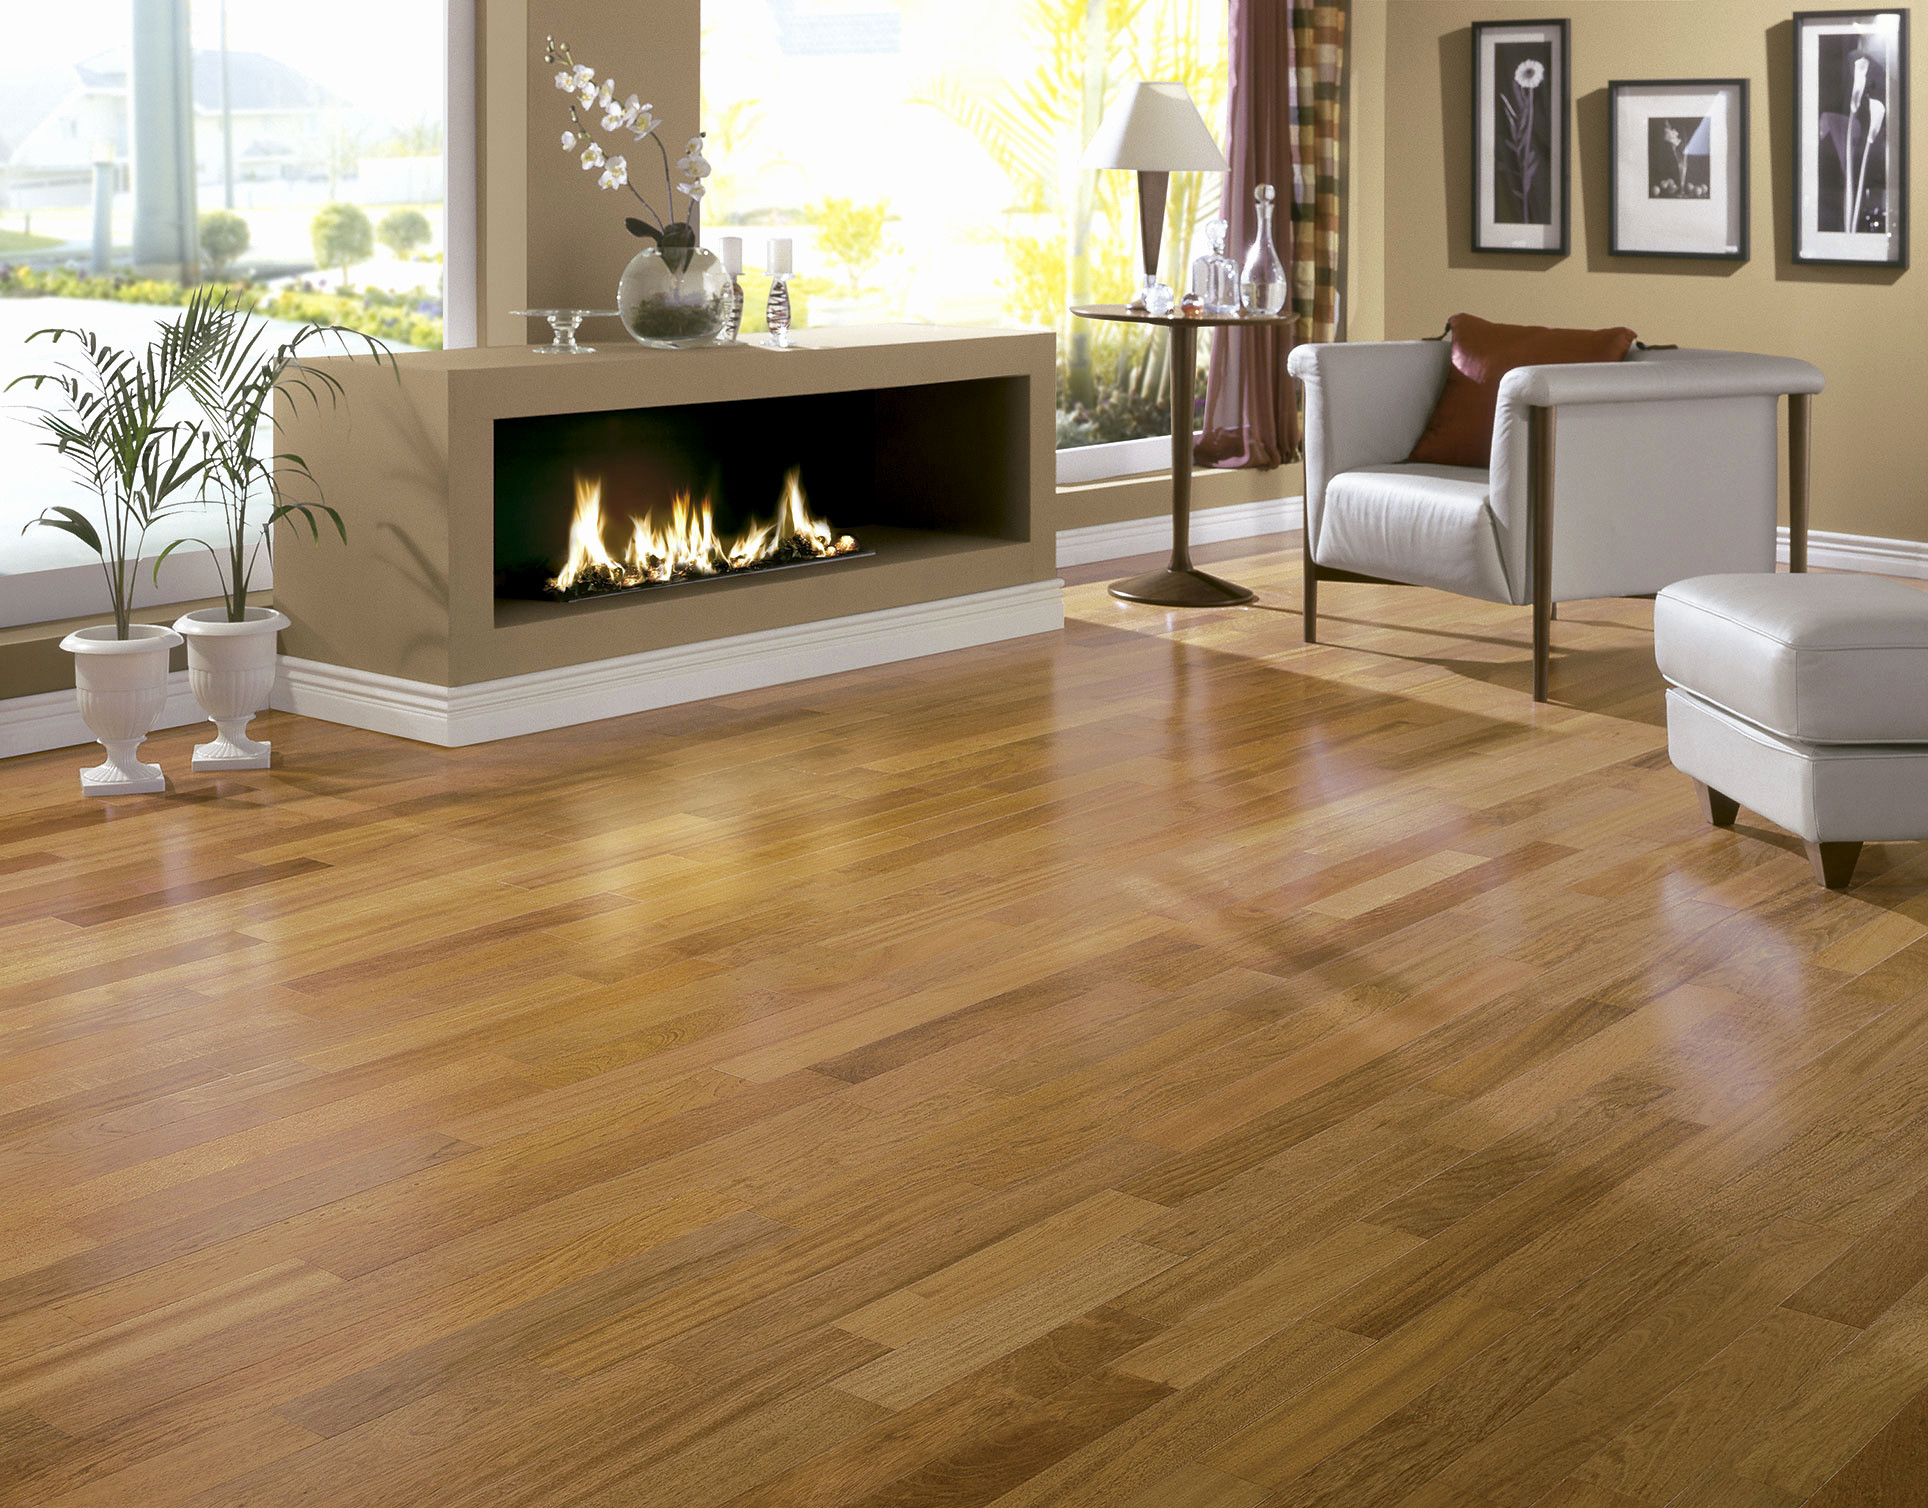 18 Nice Hardwood Flooring Albany Ny 2024 free download hardwood flooring albany ny of wlcu page 8 best home design ideas within 5 hardwood flooring best of engaging discount hardwood flooring 5 where to buy inspirational 0d